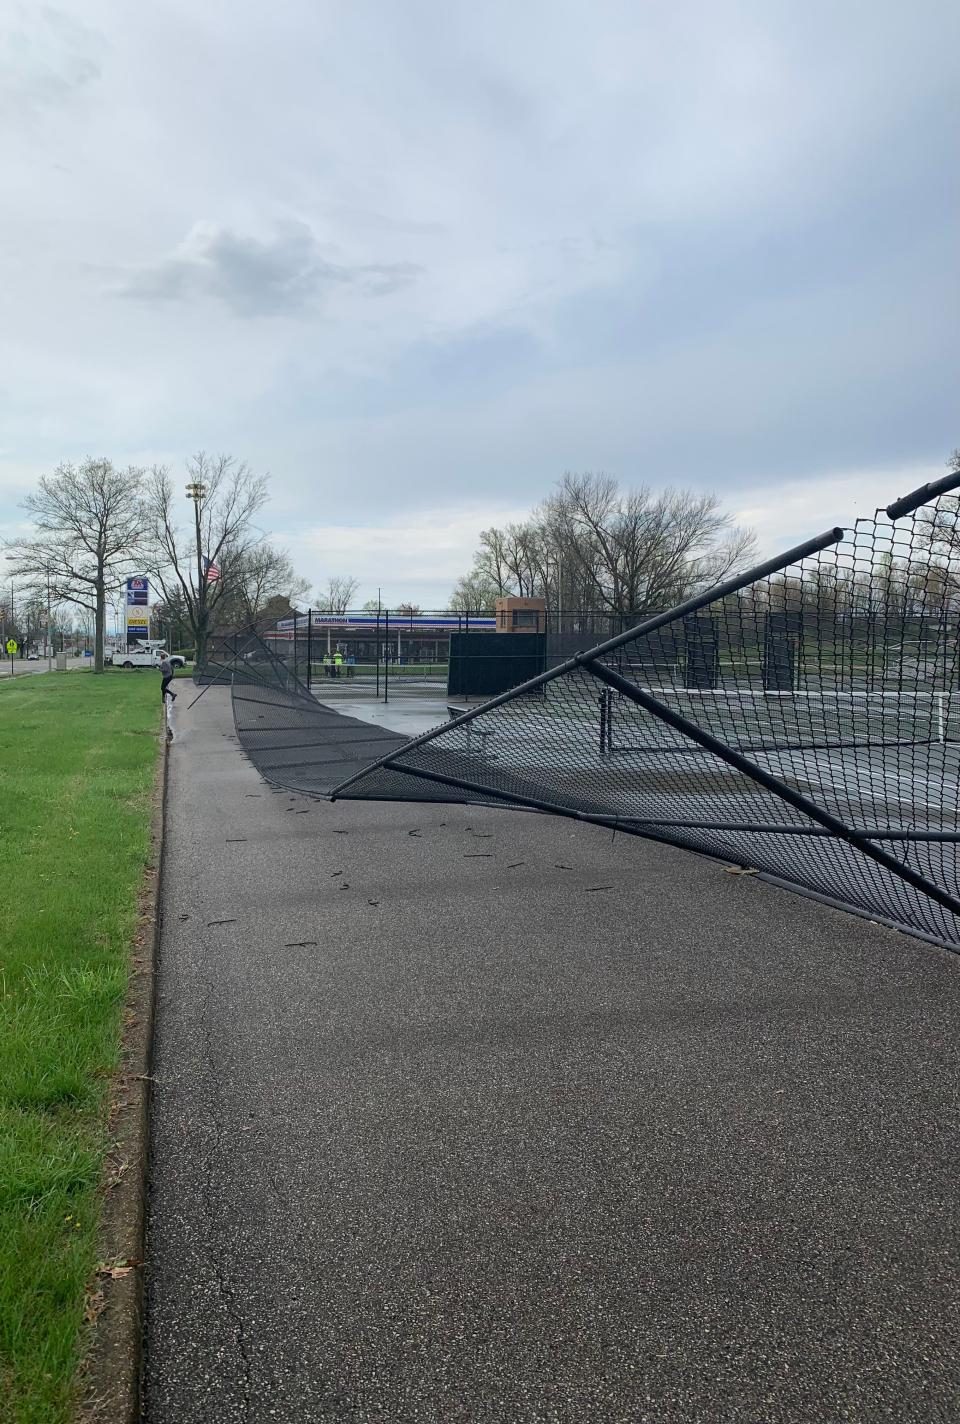 The Central tennis court fence overlooking First Avenue was damaged in last month’s severe storms.